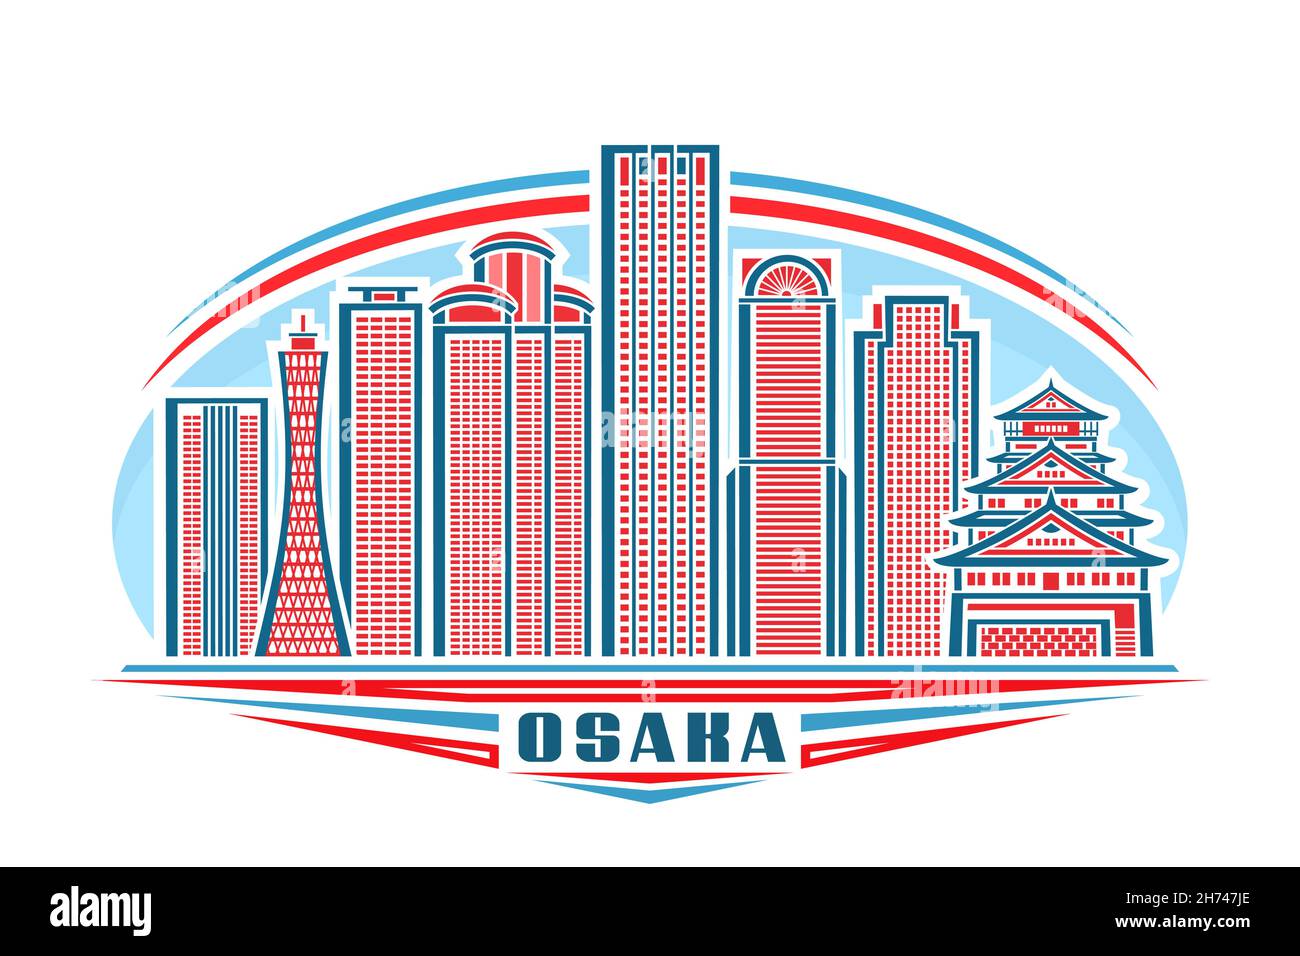 Vector illustration of Osaka, horizontal logo with linear design famous osaka city scape on day sky background, asian urban line art concept with deco Stock Vector